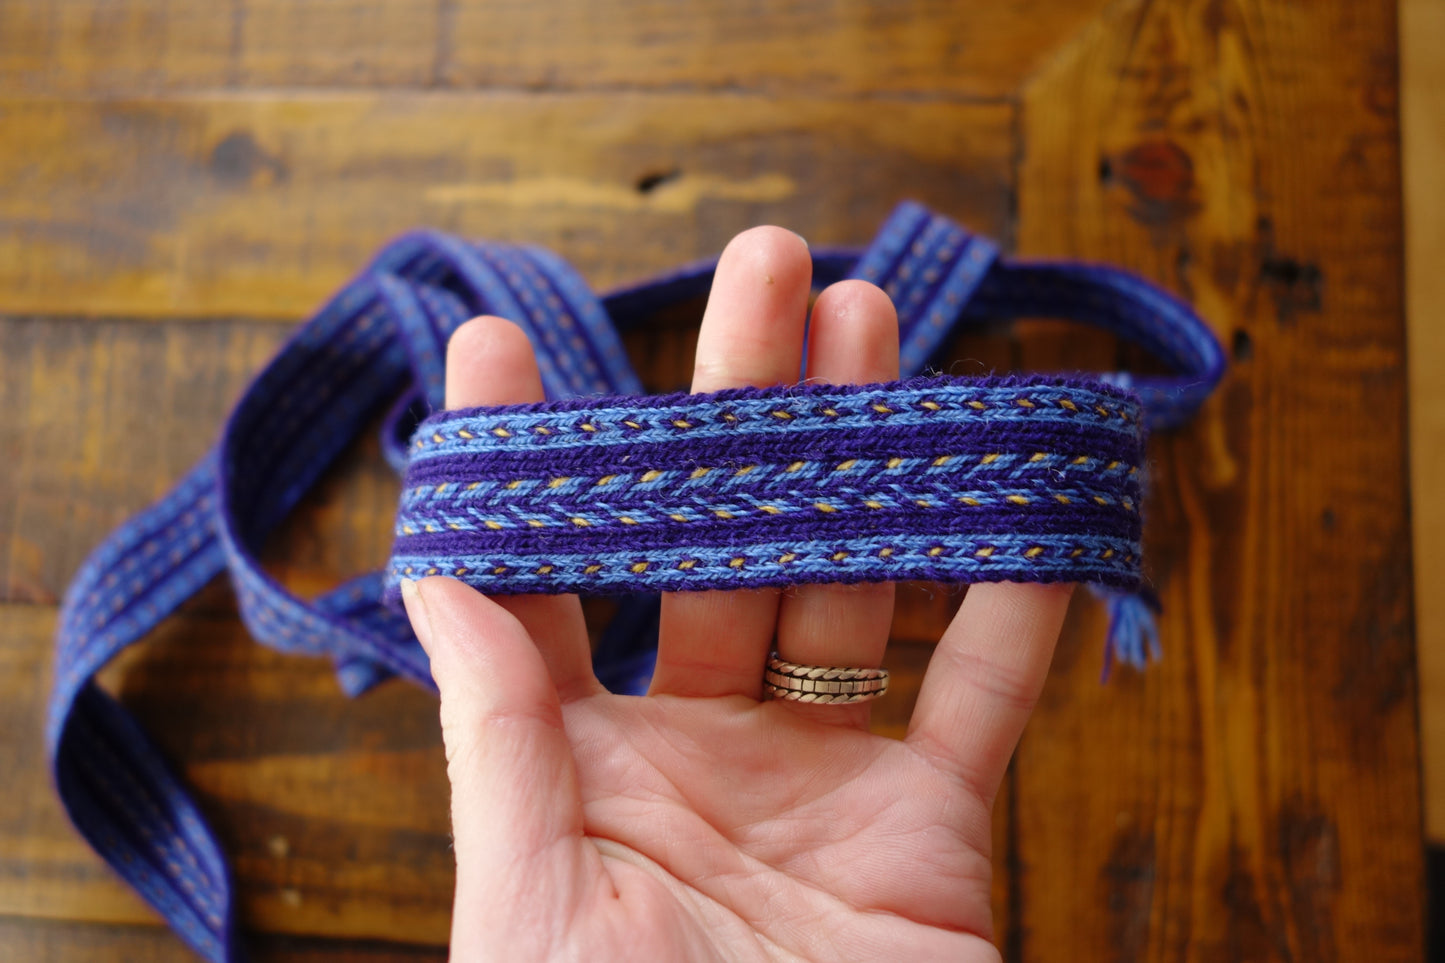 ''Milky way'' - a belt in vivid blue with small stars